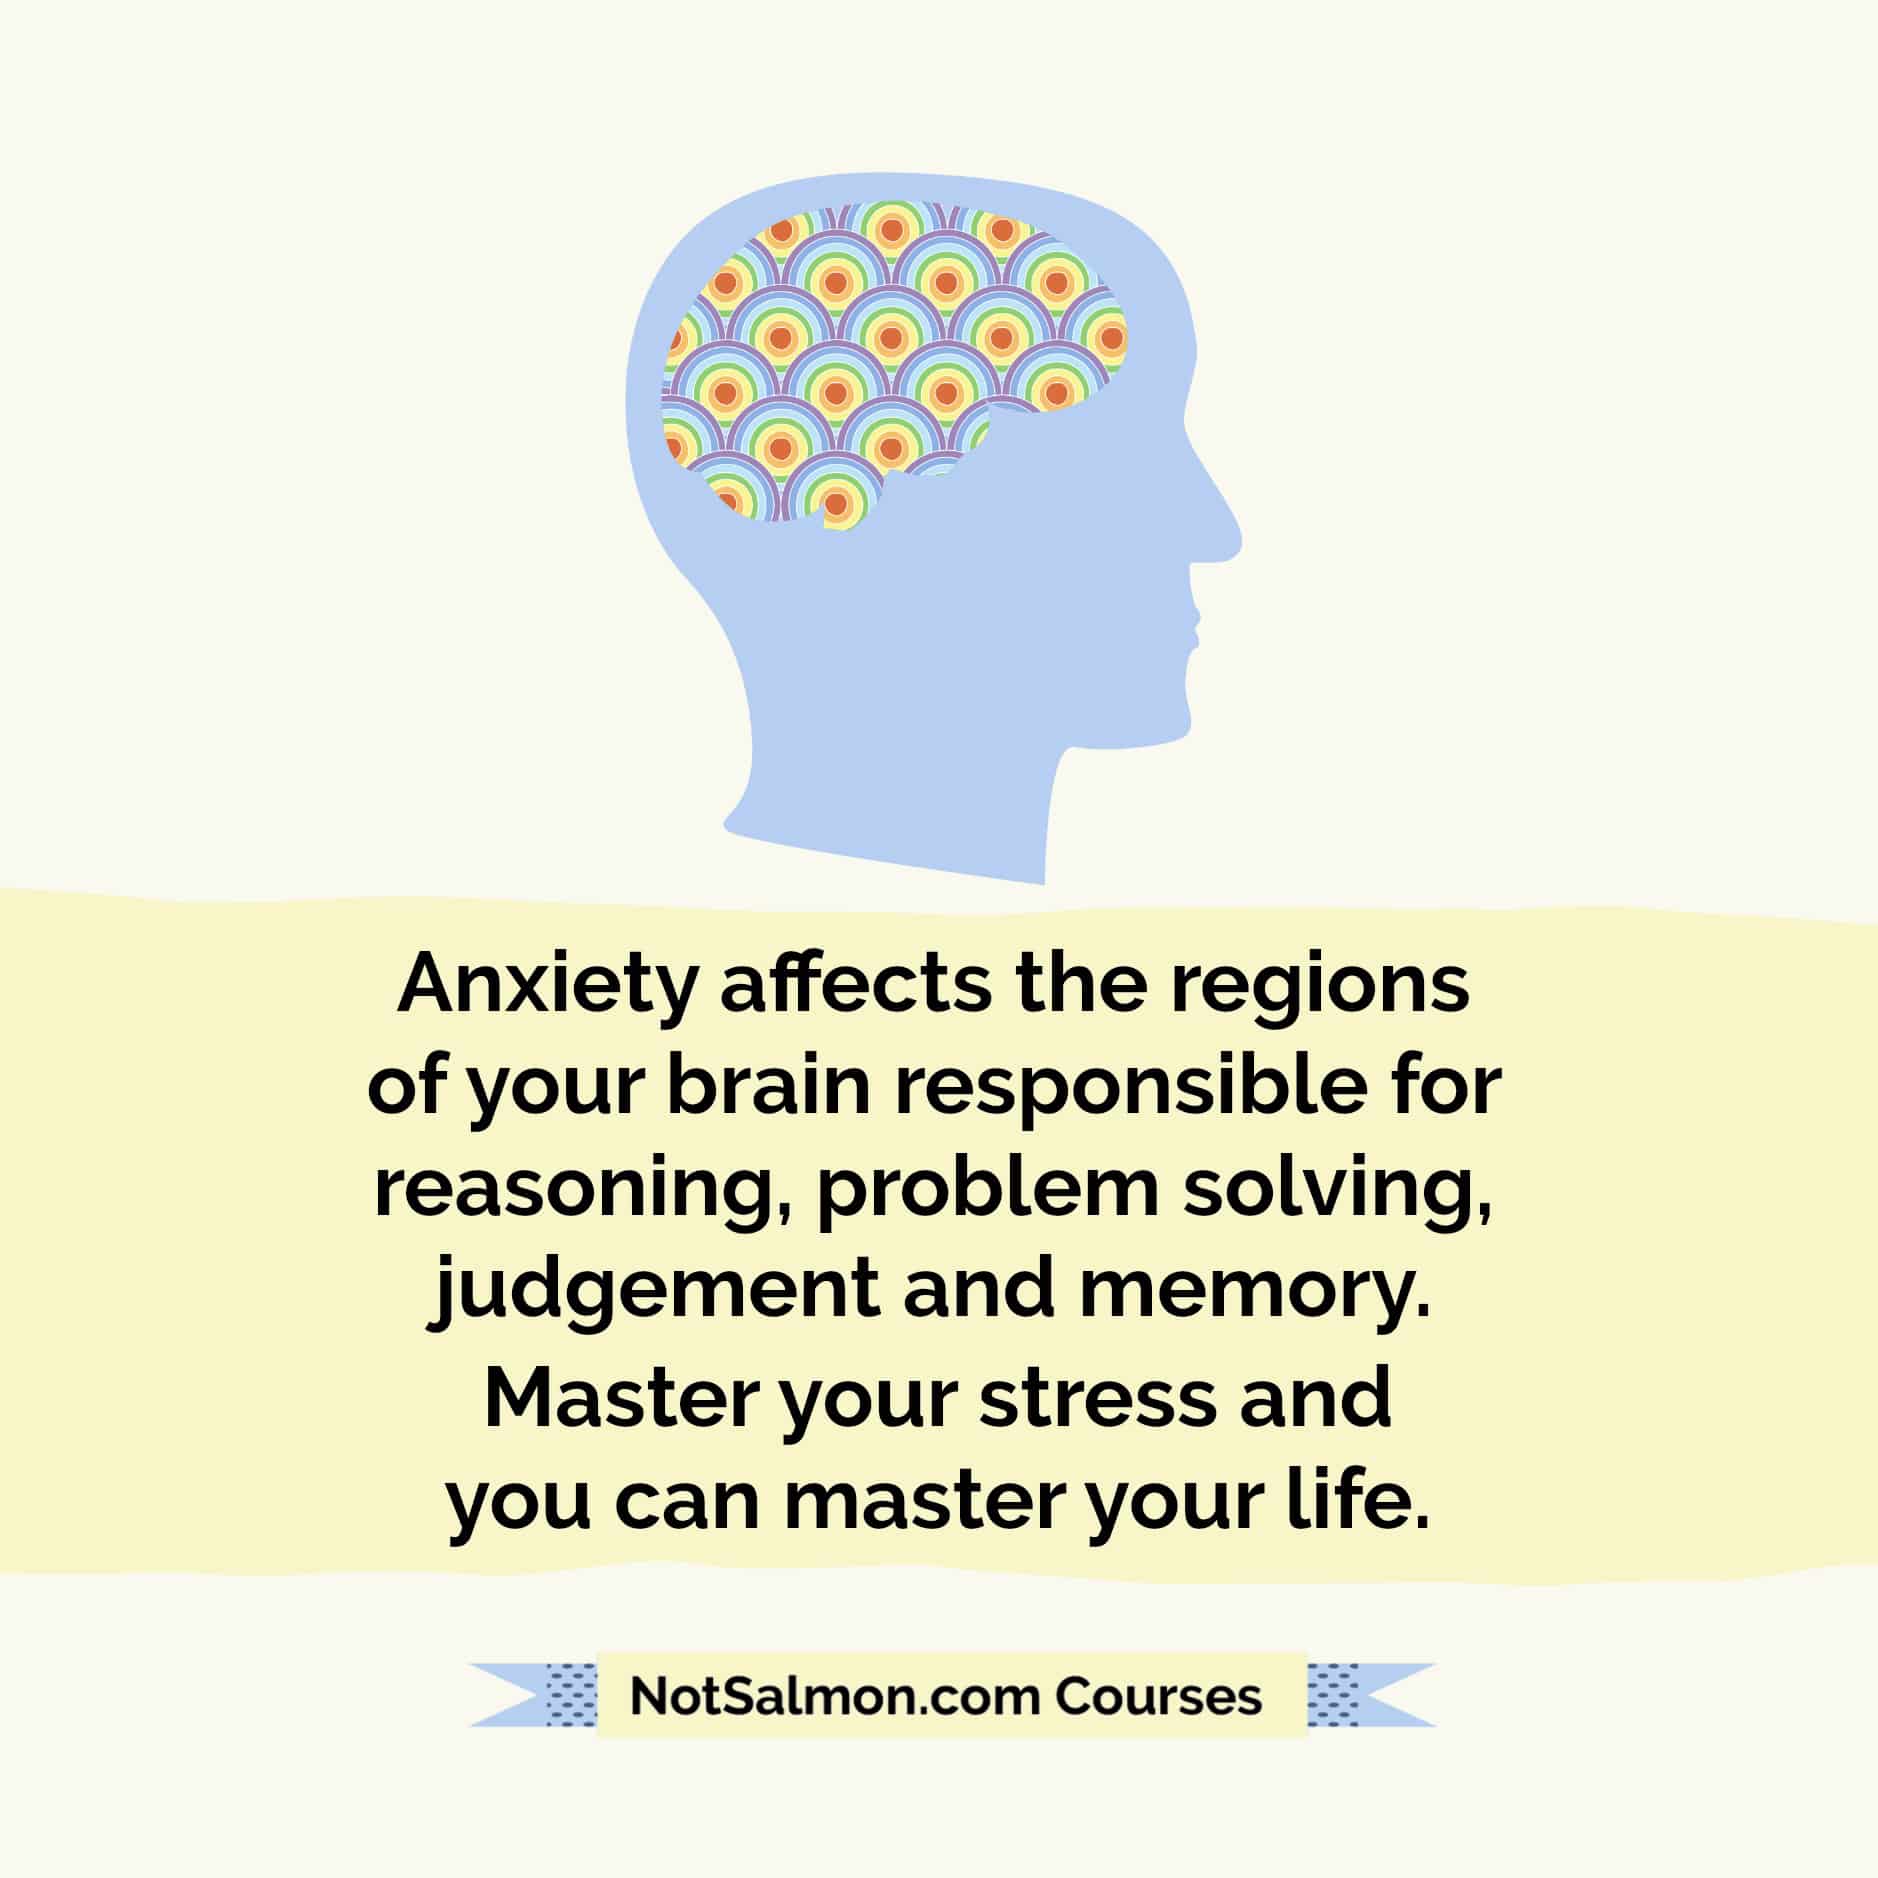 anxiety affects regions of the brain master stress master life